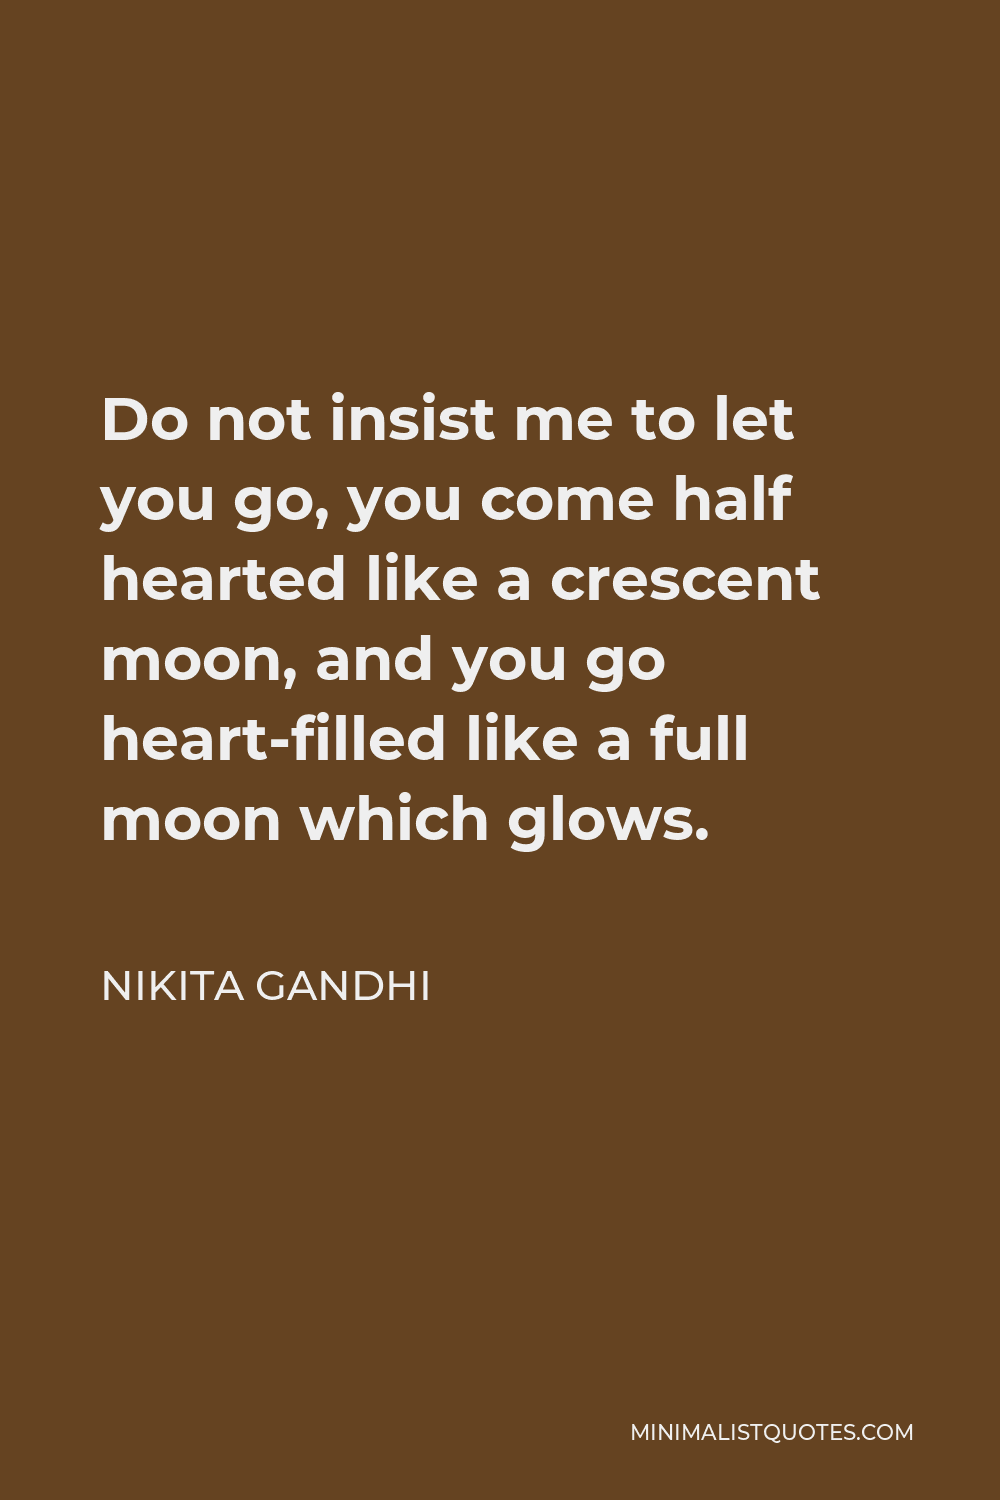 Nikita Gandhi Quote - Do not insist me to let you go, you come half hearted like a crescent moon, and you go heart-filled like a full moon which glows.